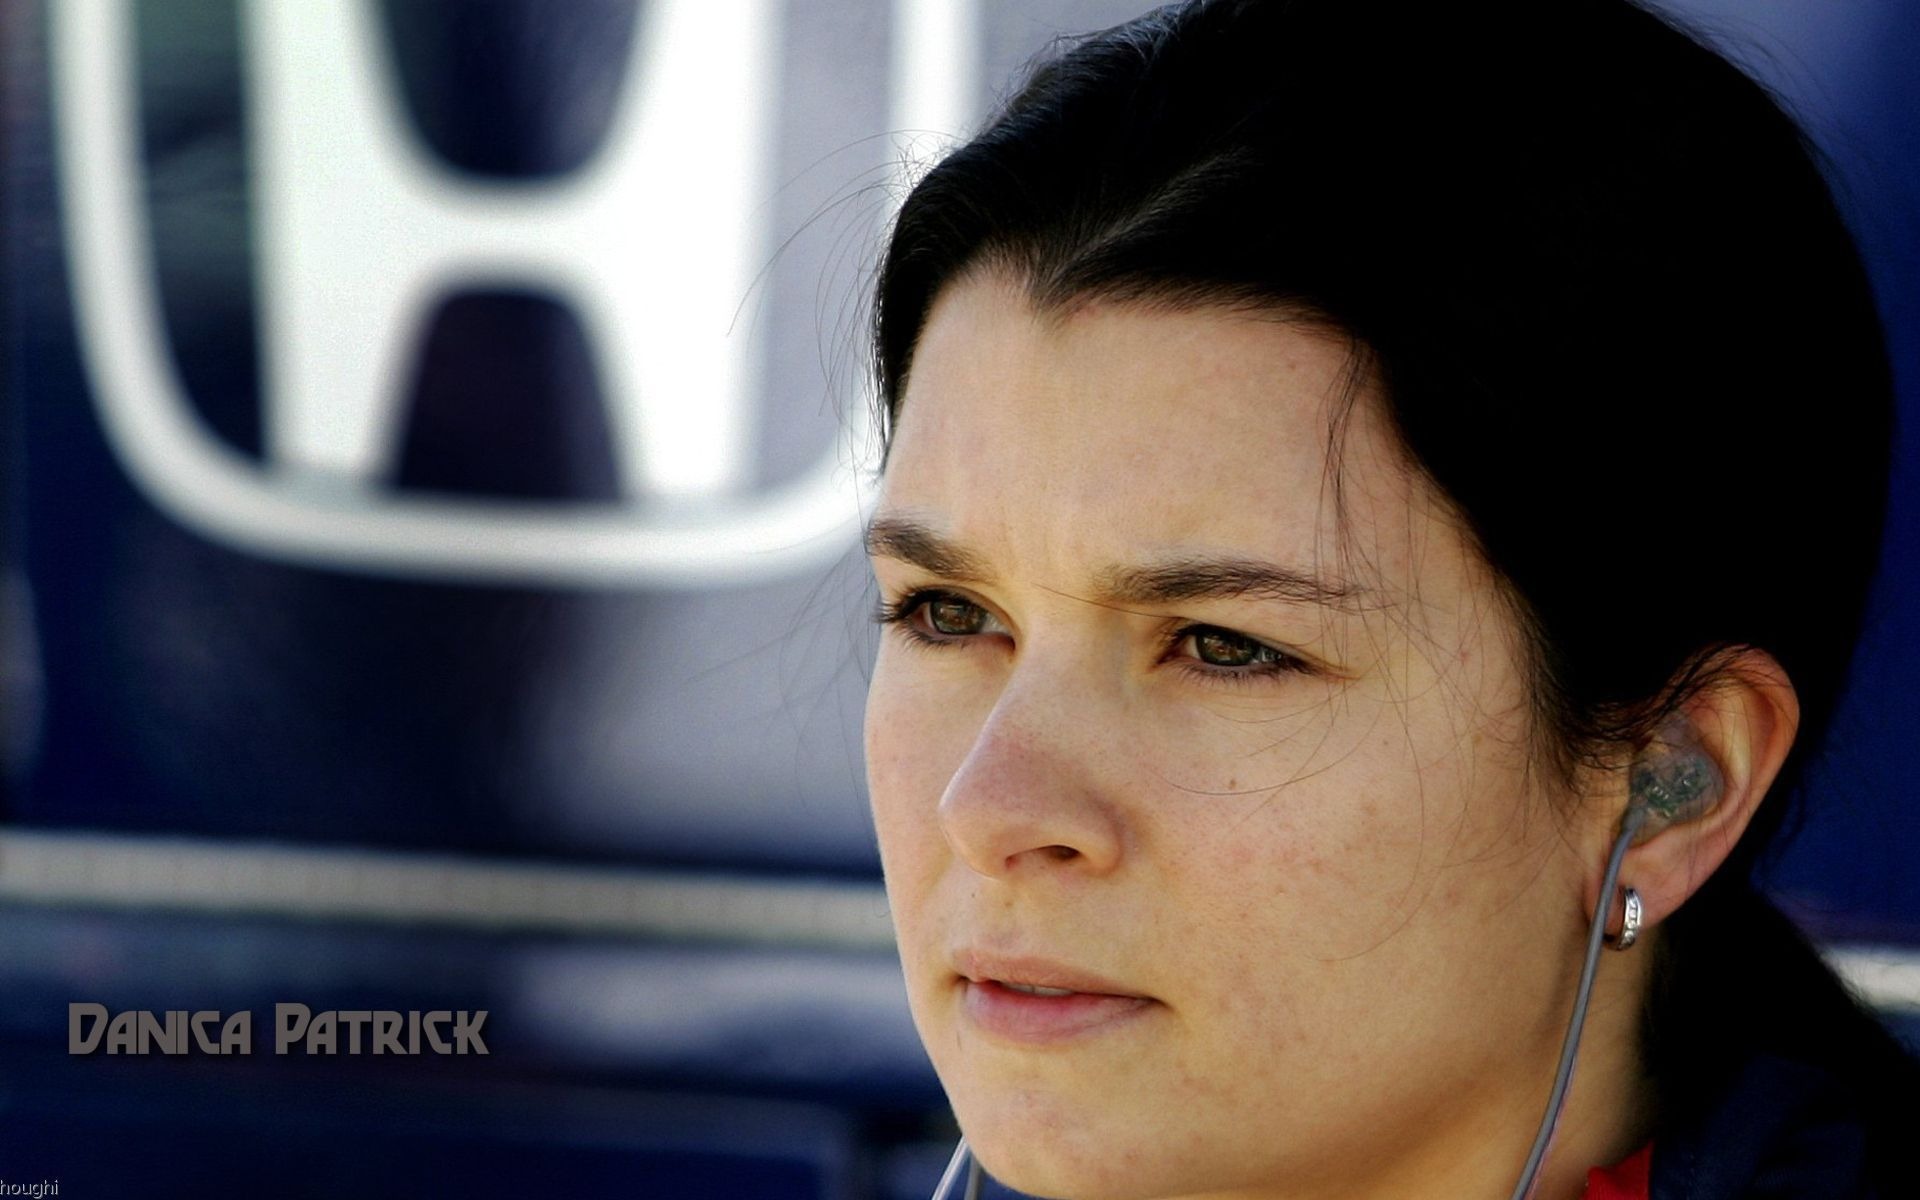 Danica Patrick #007 - 1920x1200 Wallpapers Pictures Photos Images